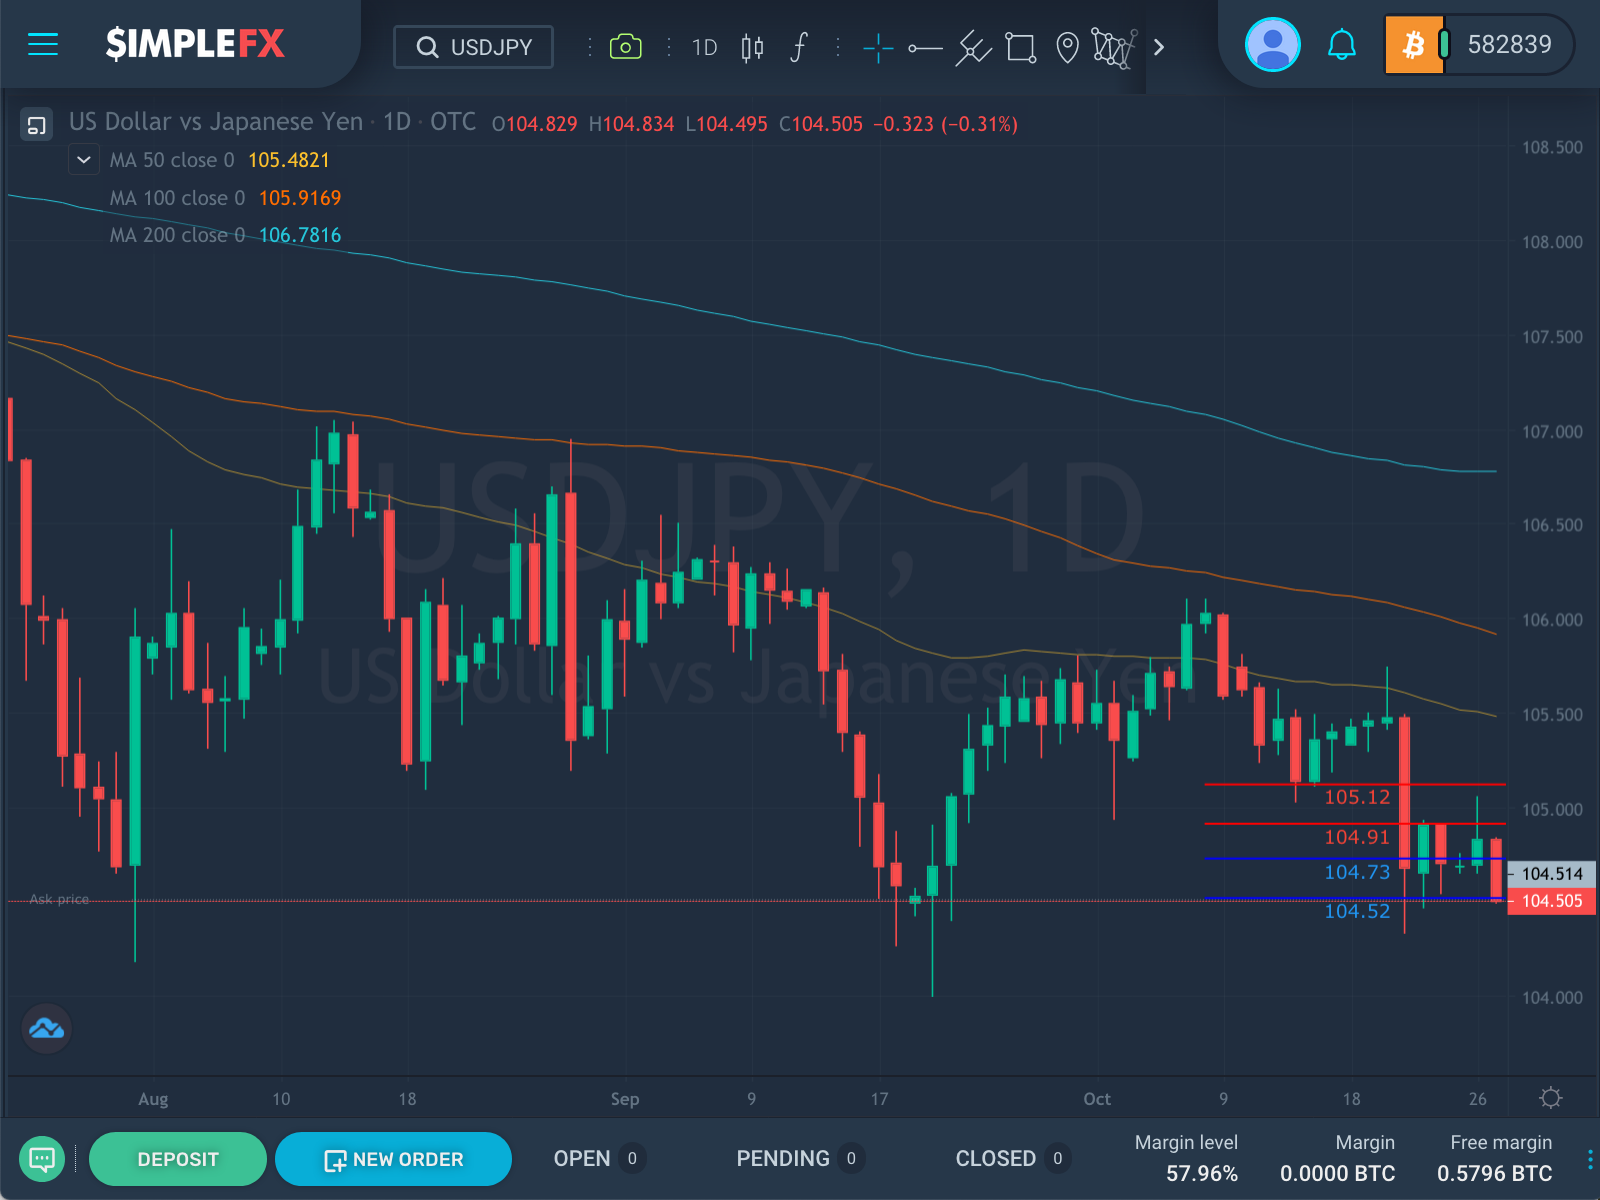 USDJPY trajectory in the past 3 months, SimpleFX WebTrader